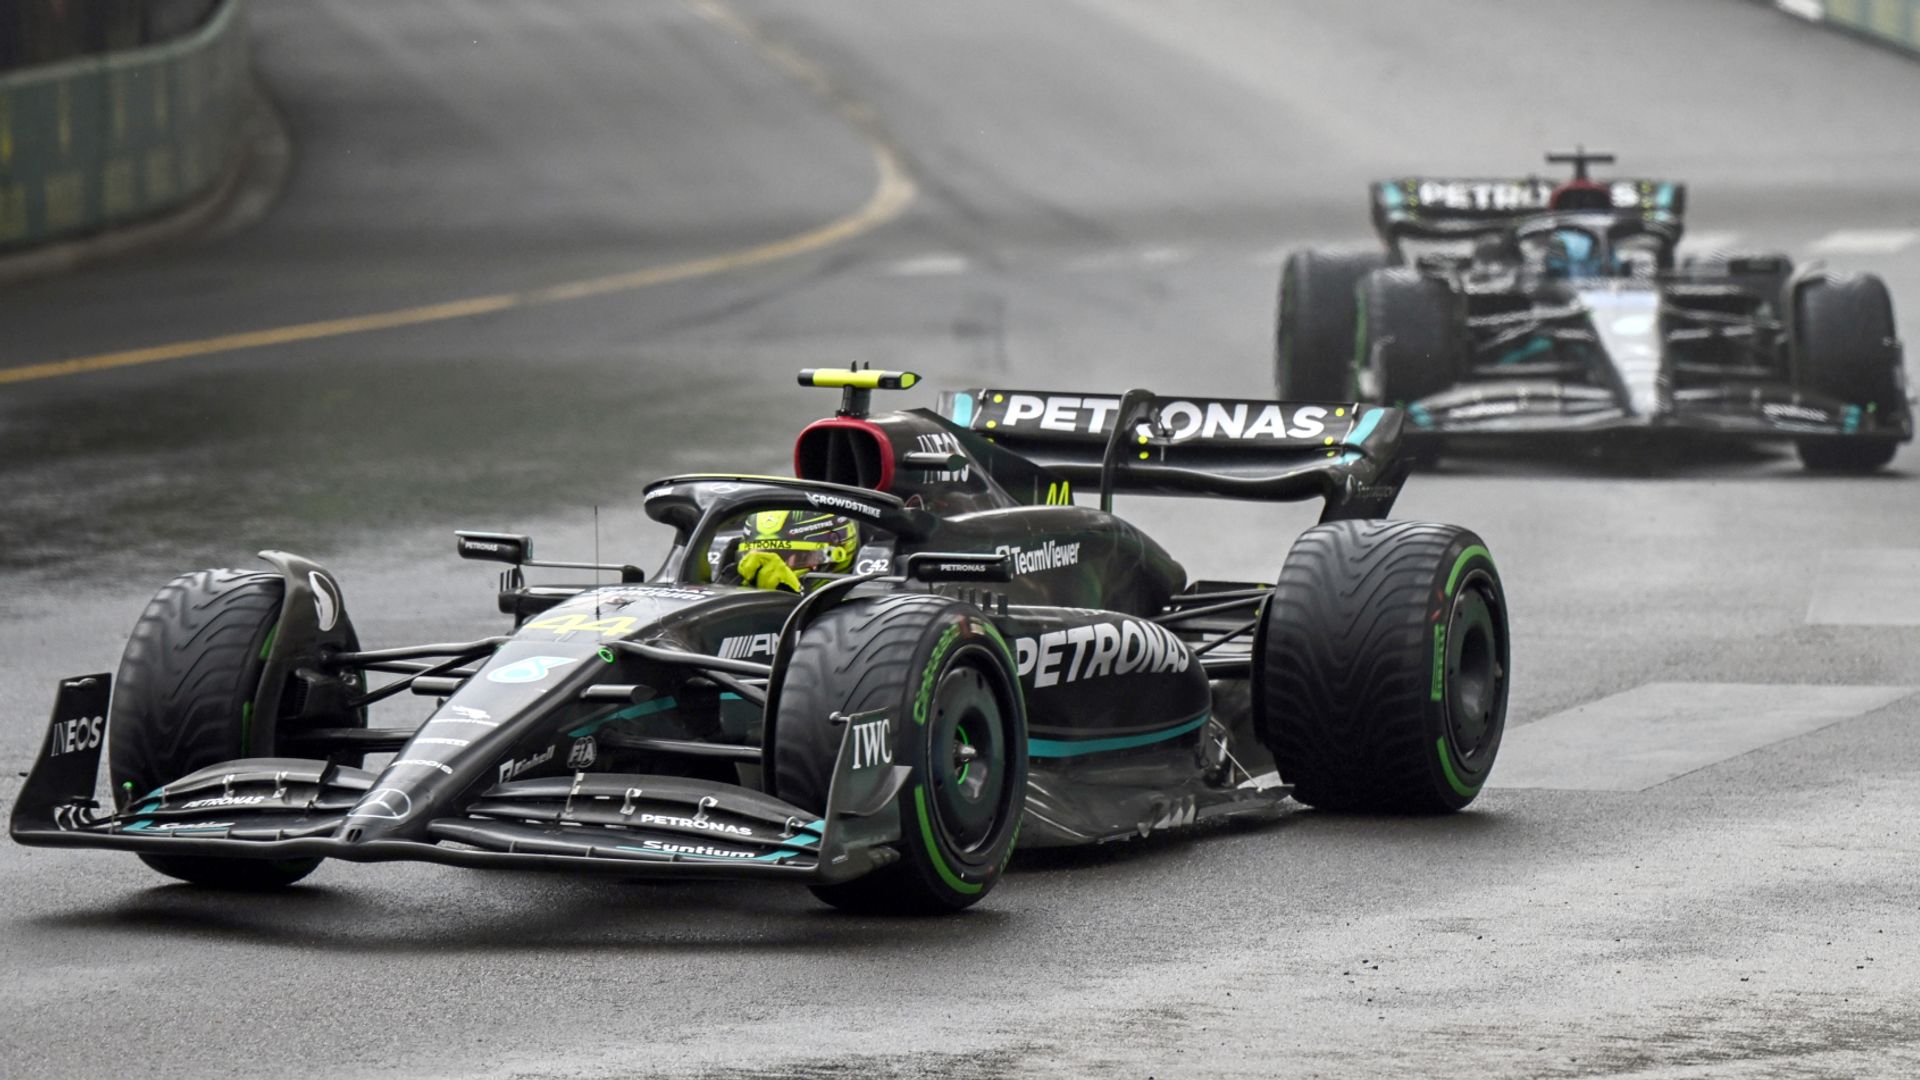 Hamilton: Mercedes have moved forward | Russell rues error which cost P3